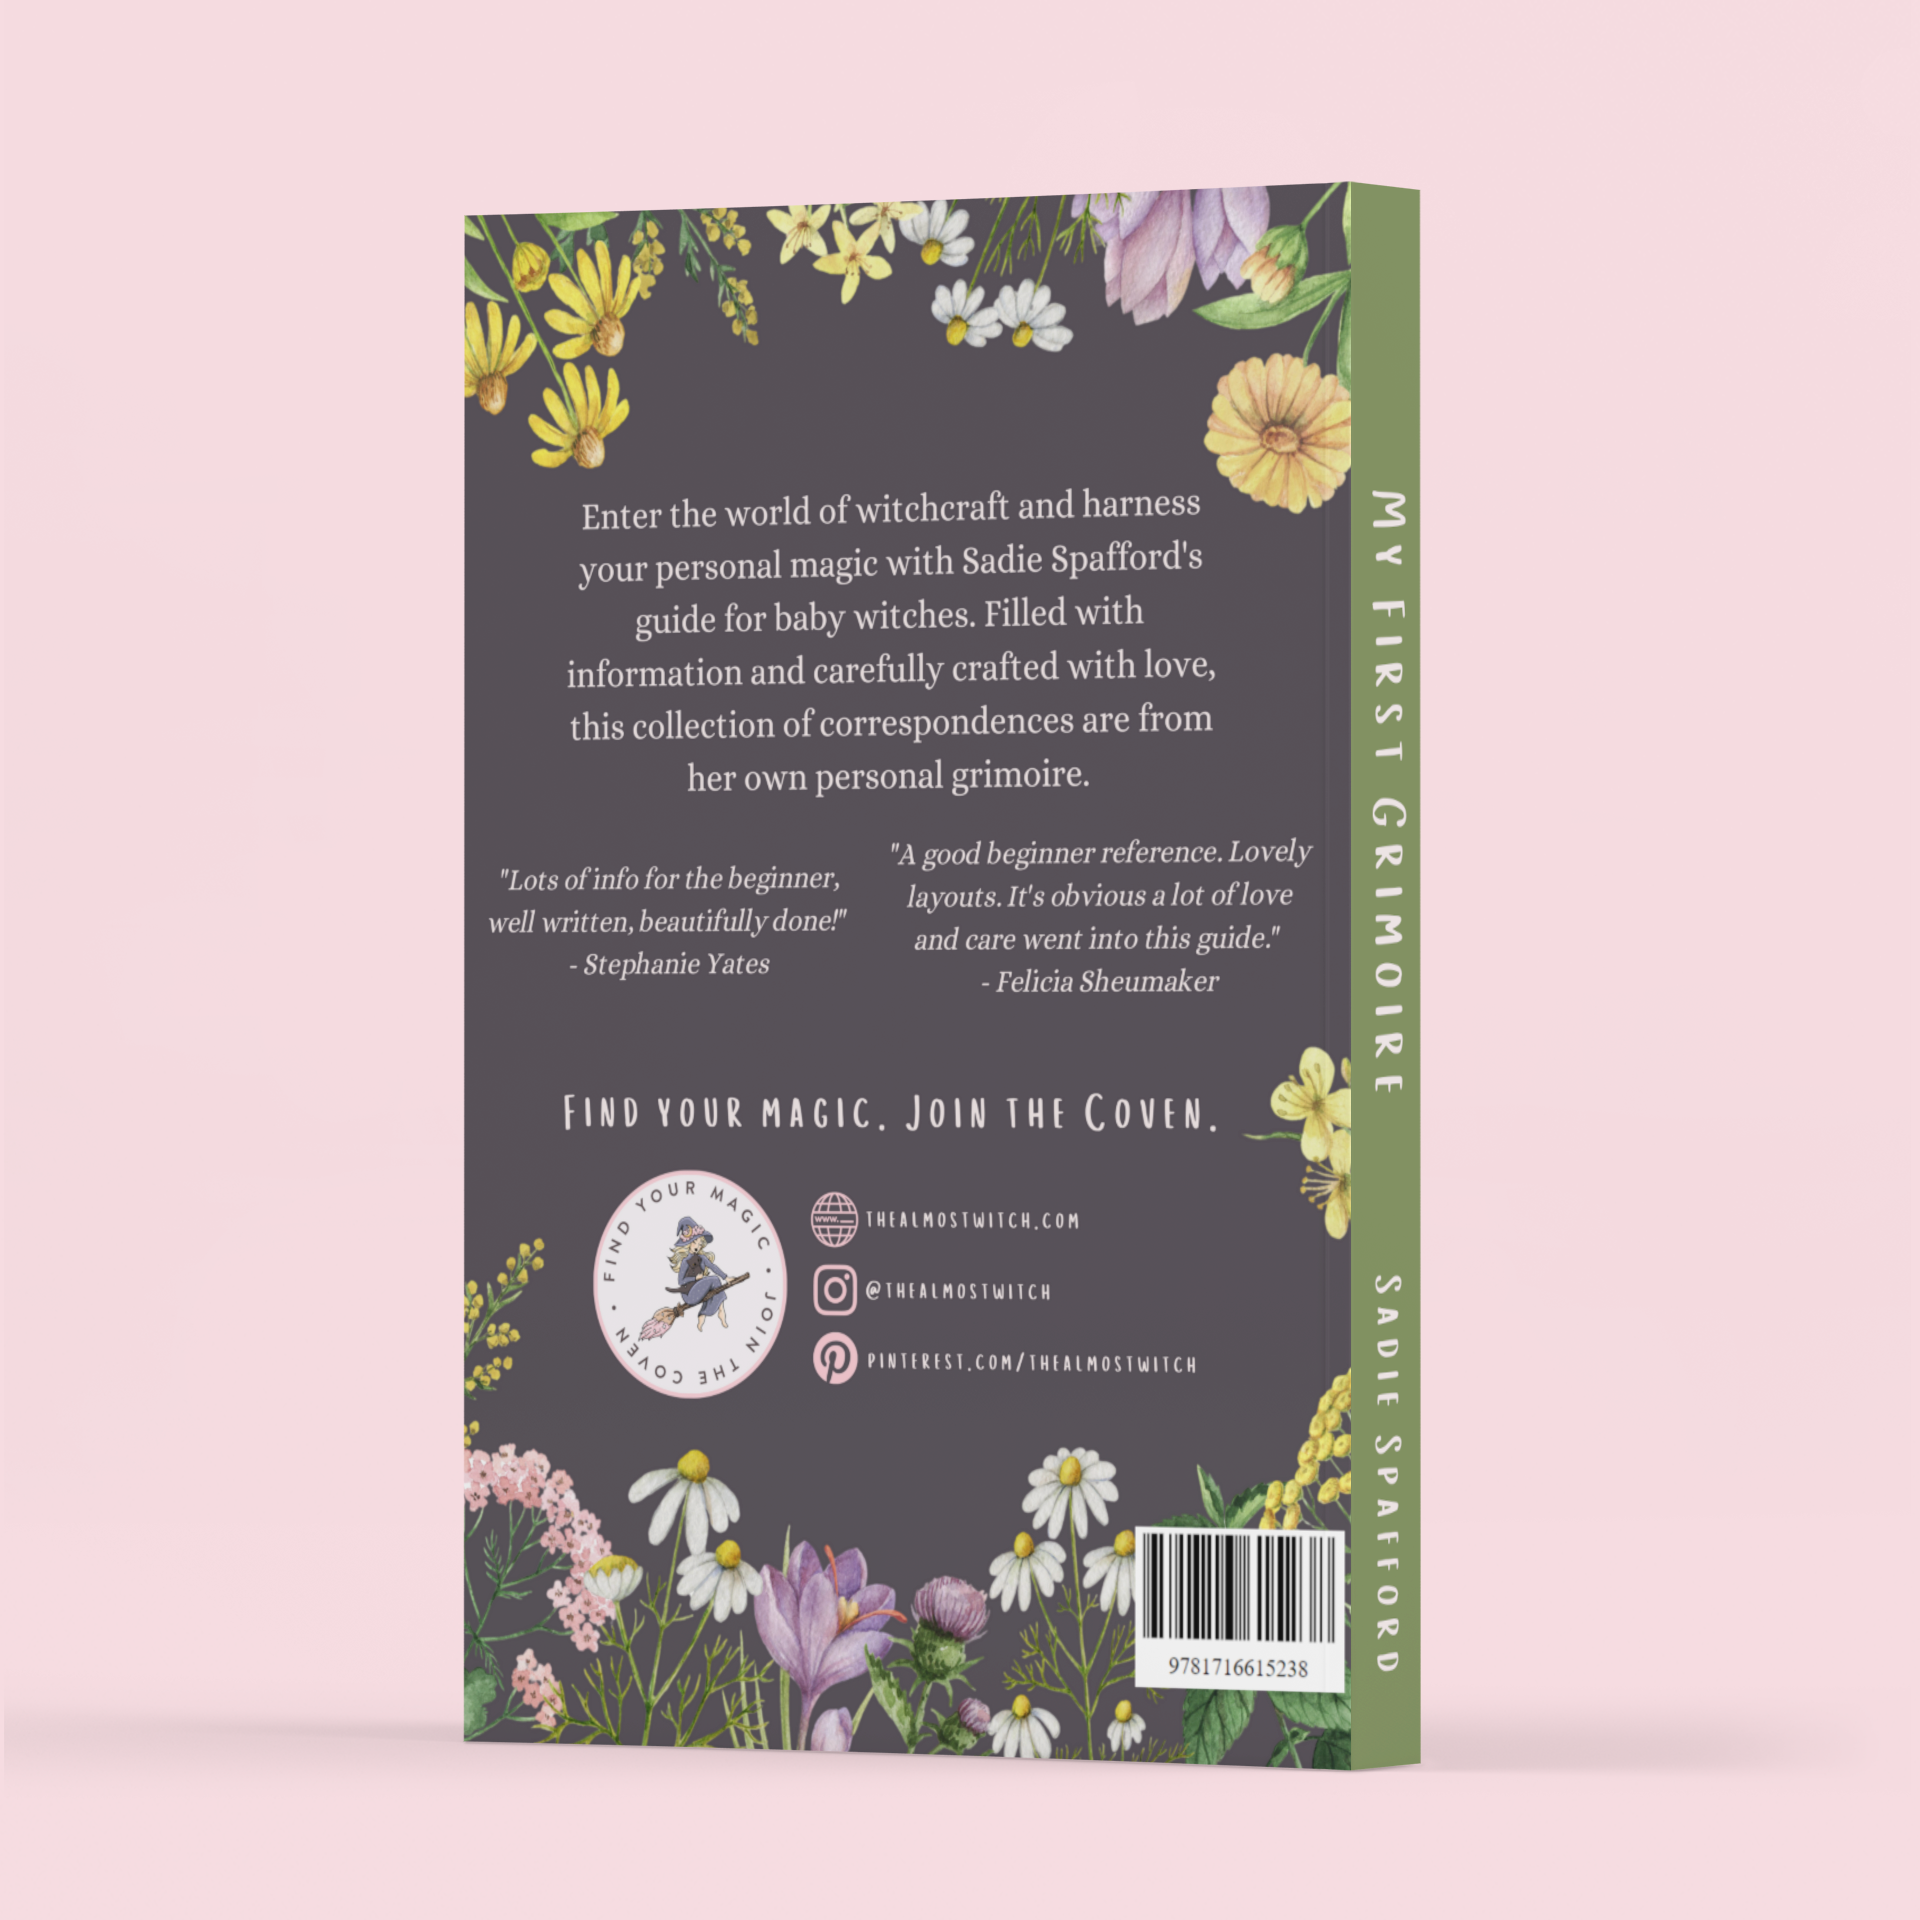 mockup-featuring-the-back-of-a-paperback-book-against-a-plain-backdrop-3436-el1.png